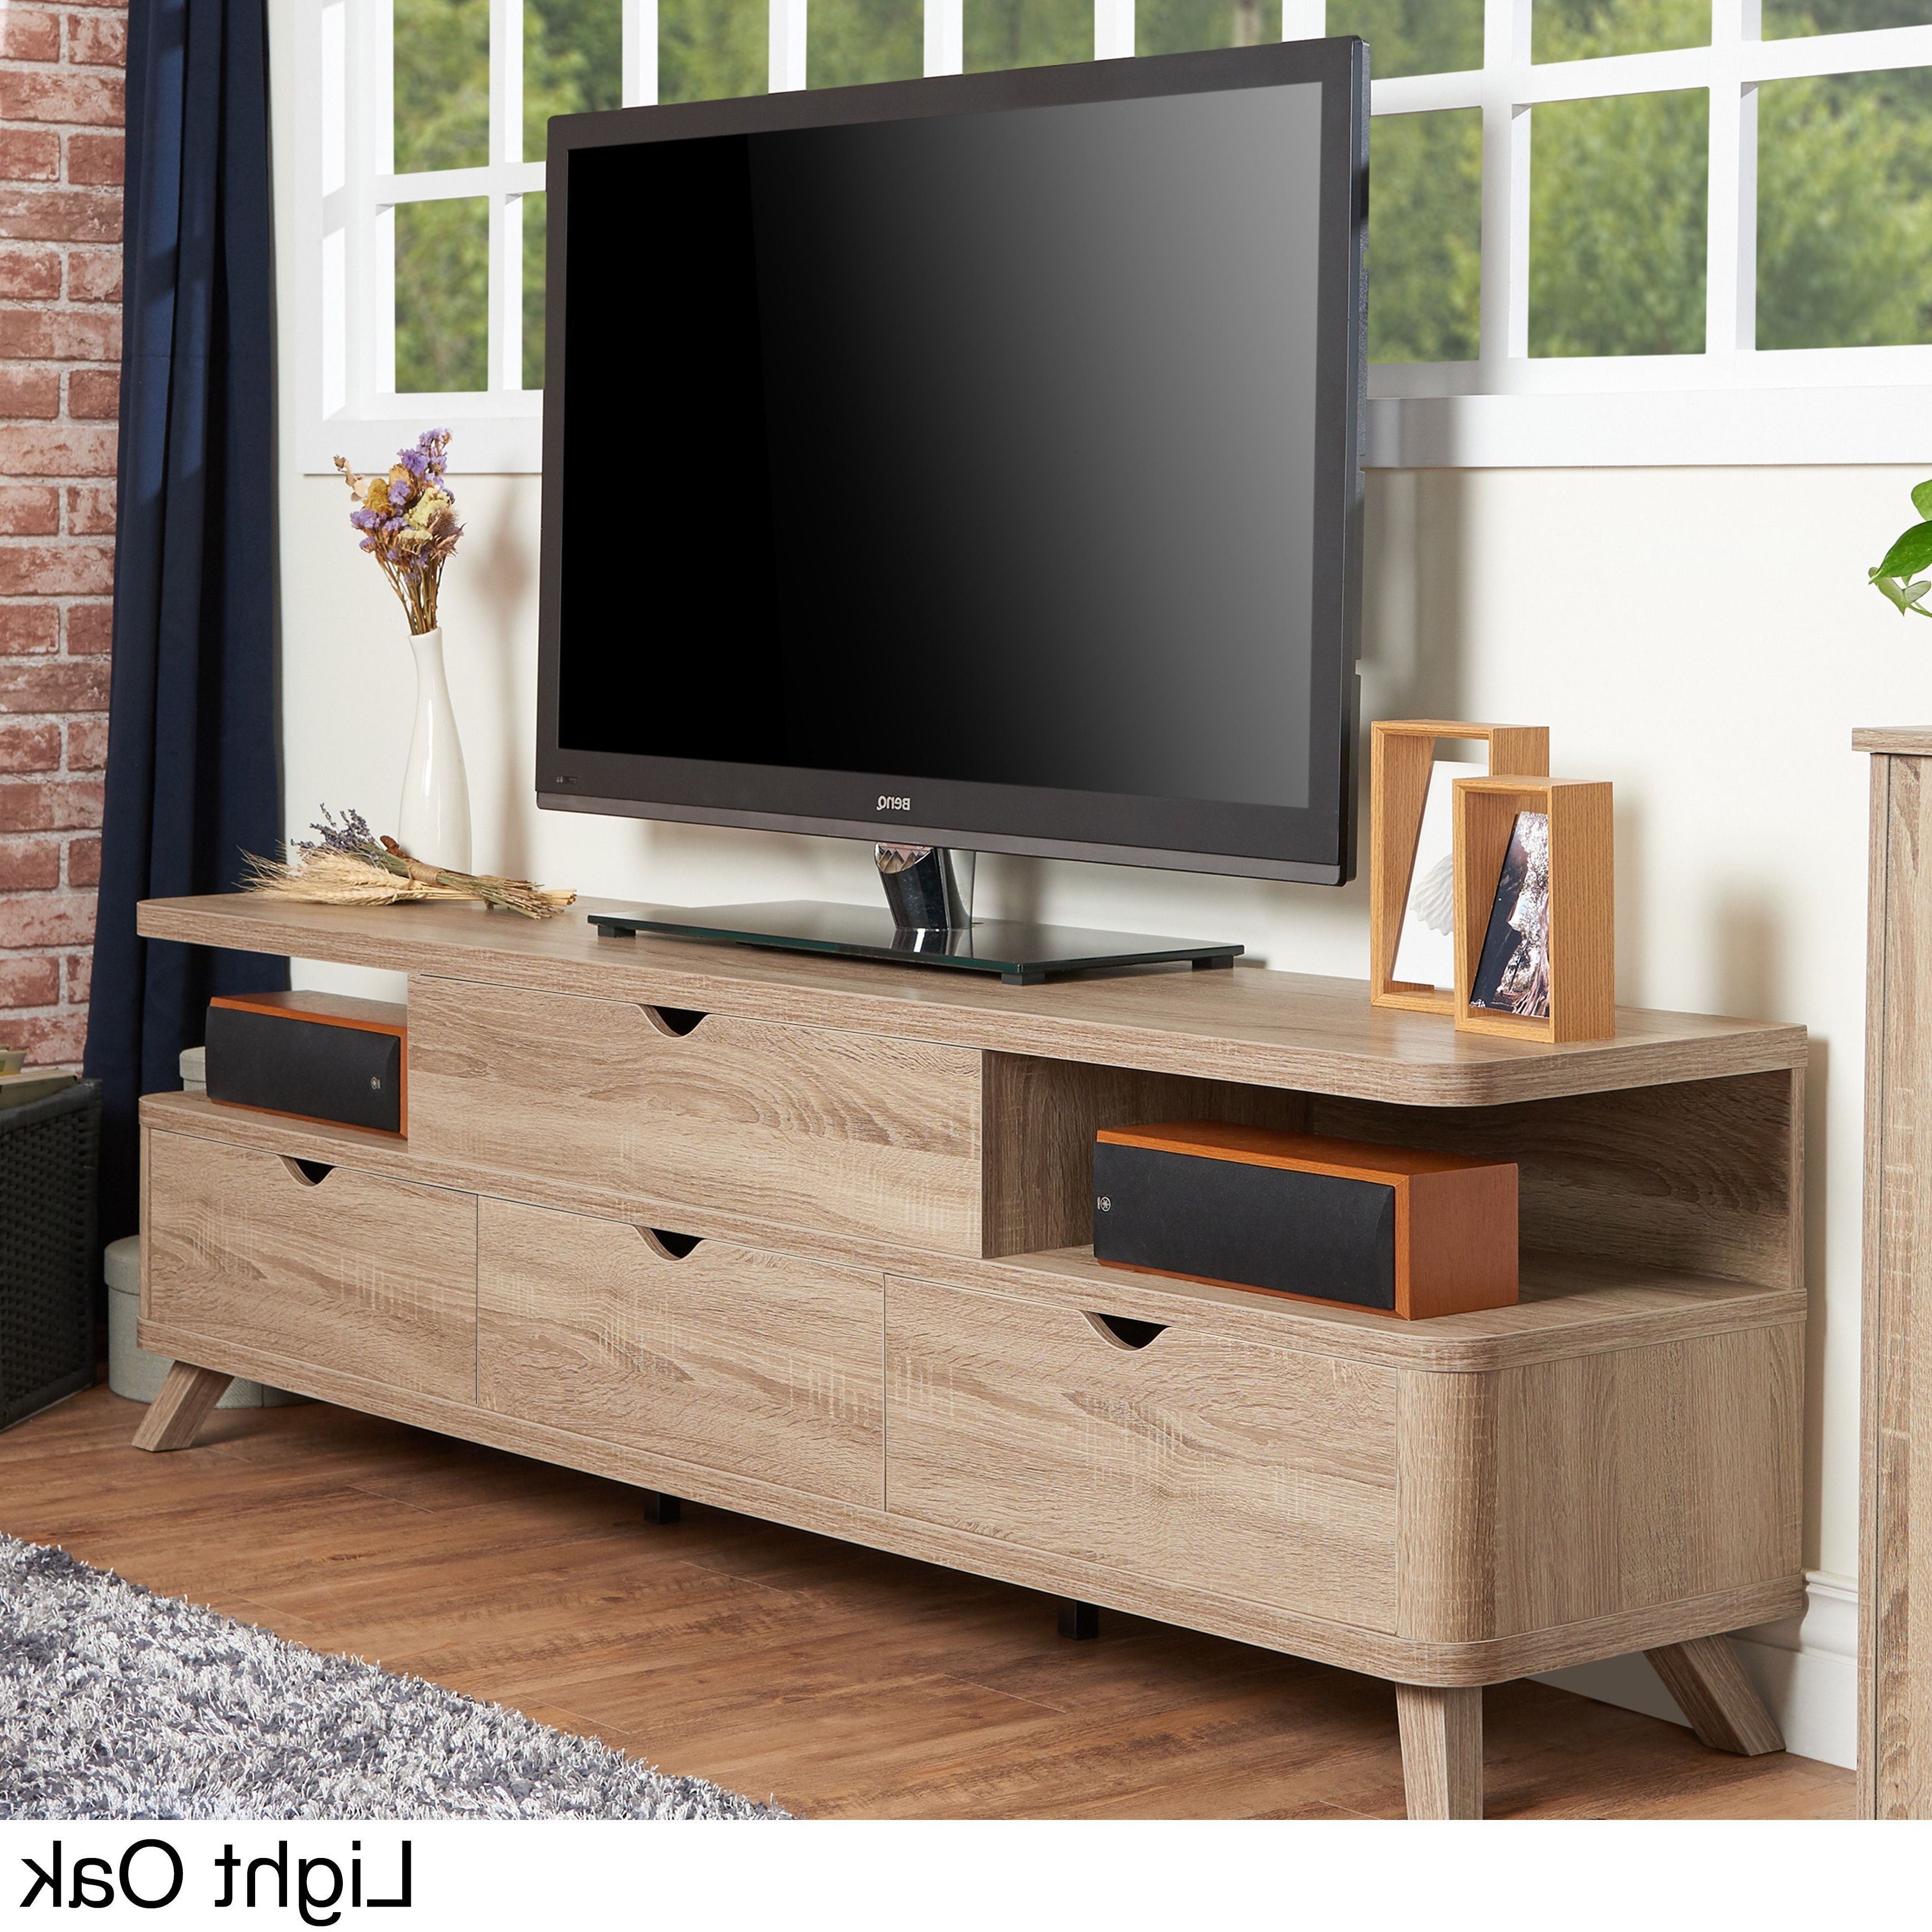 Most Recent With Its Flared Legs And Rounded Corners, This Tv Stand Adds Pertaining To Tv Stands With Rounded Corners (Photo 13 of 20)